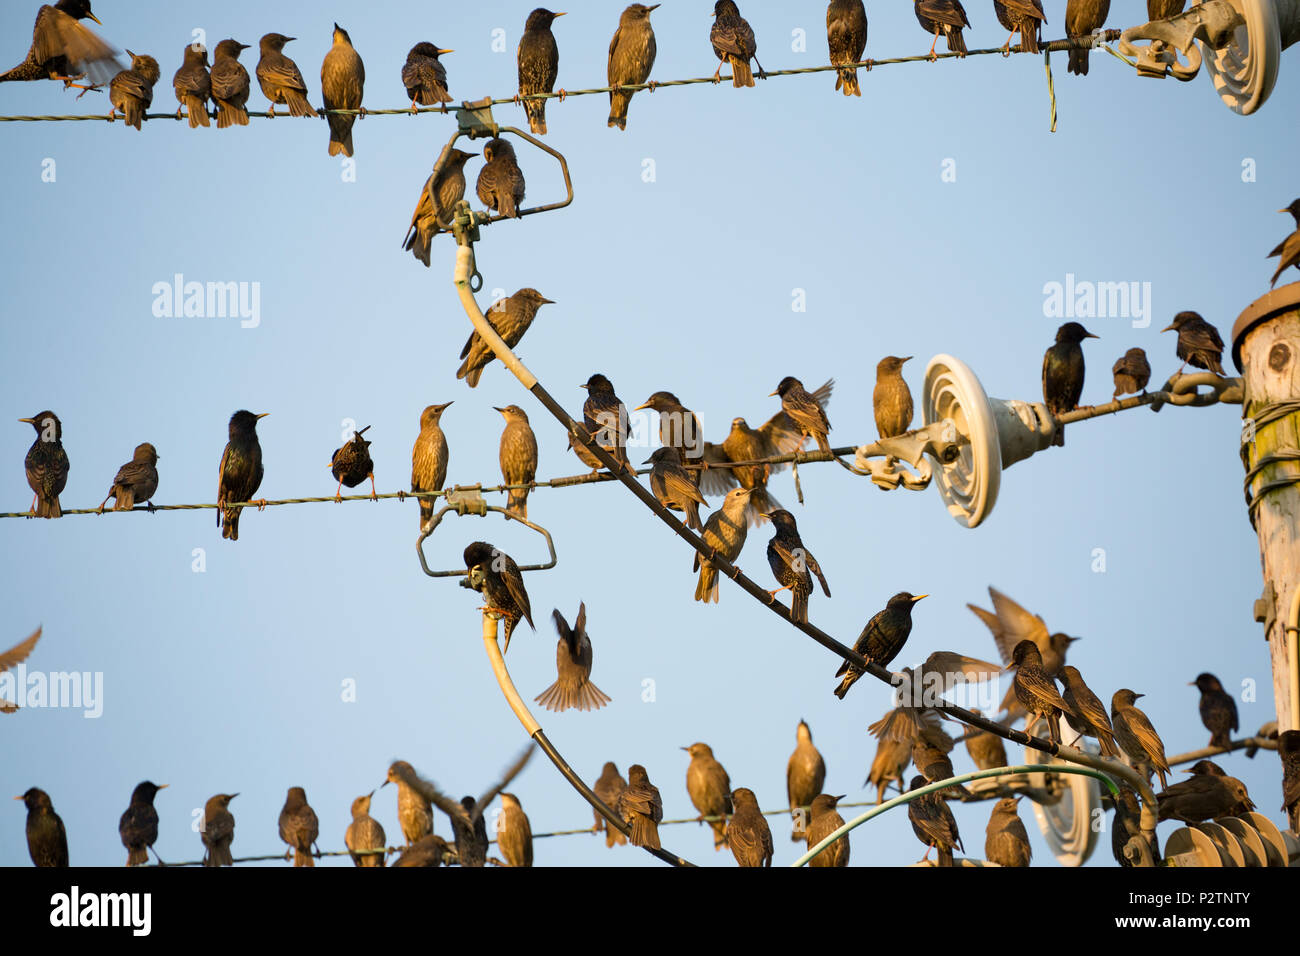 Adult and juvenile starlings, Sturnus vulgaris, gathering on telegraph lines in the evening before heading off to roost. The adults are dark in colour Stock Photo